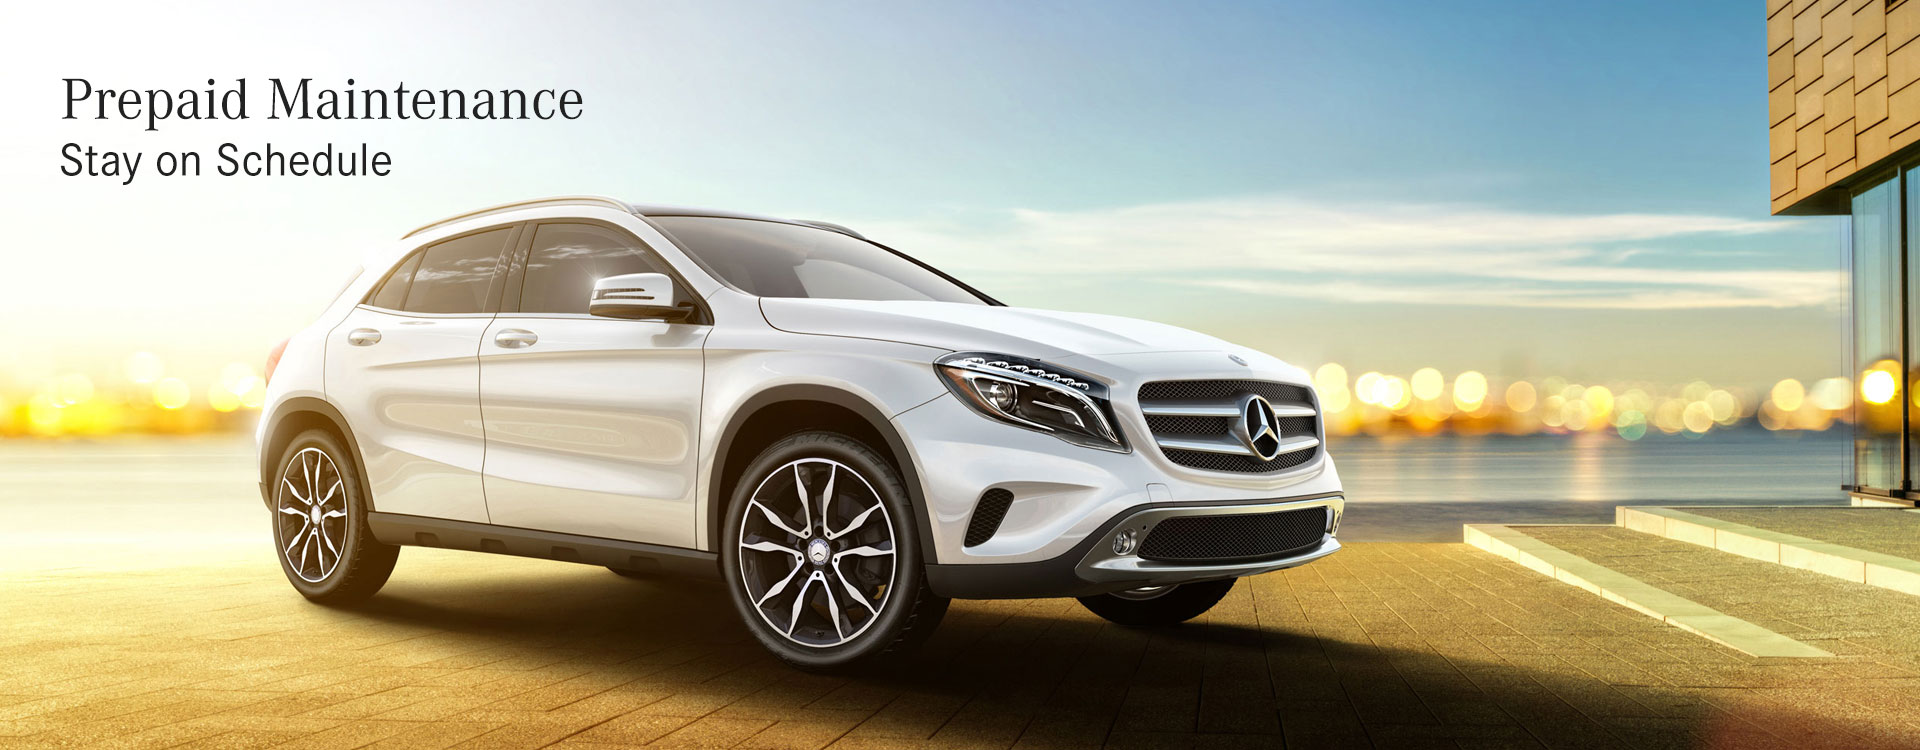 Mercedes canada extended limited warranty